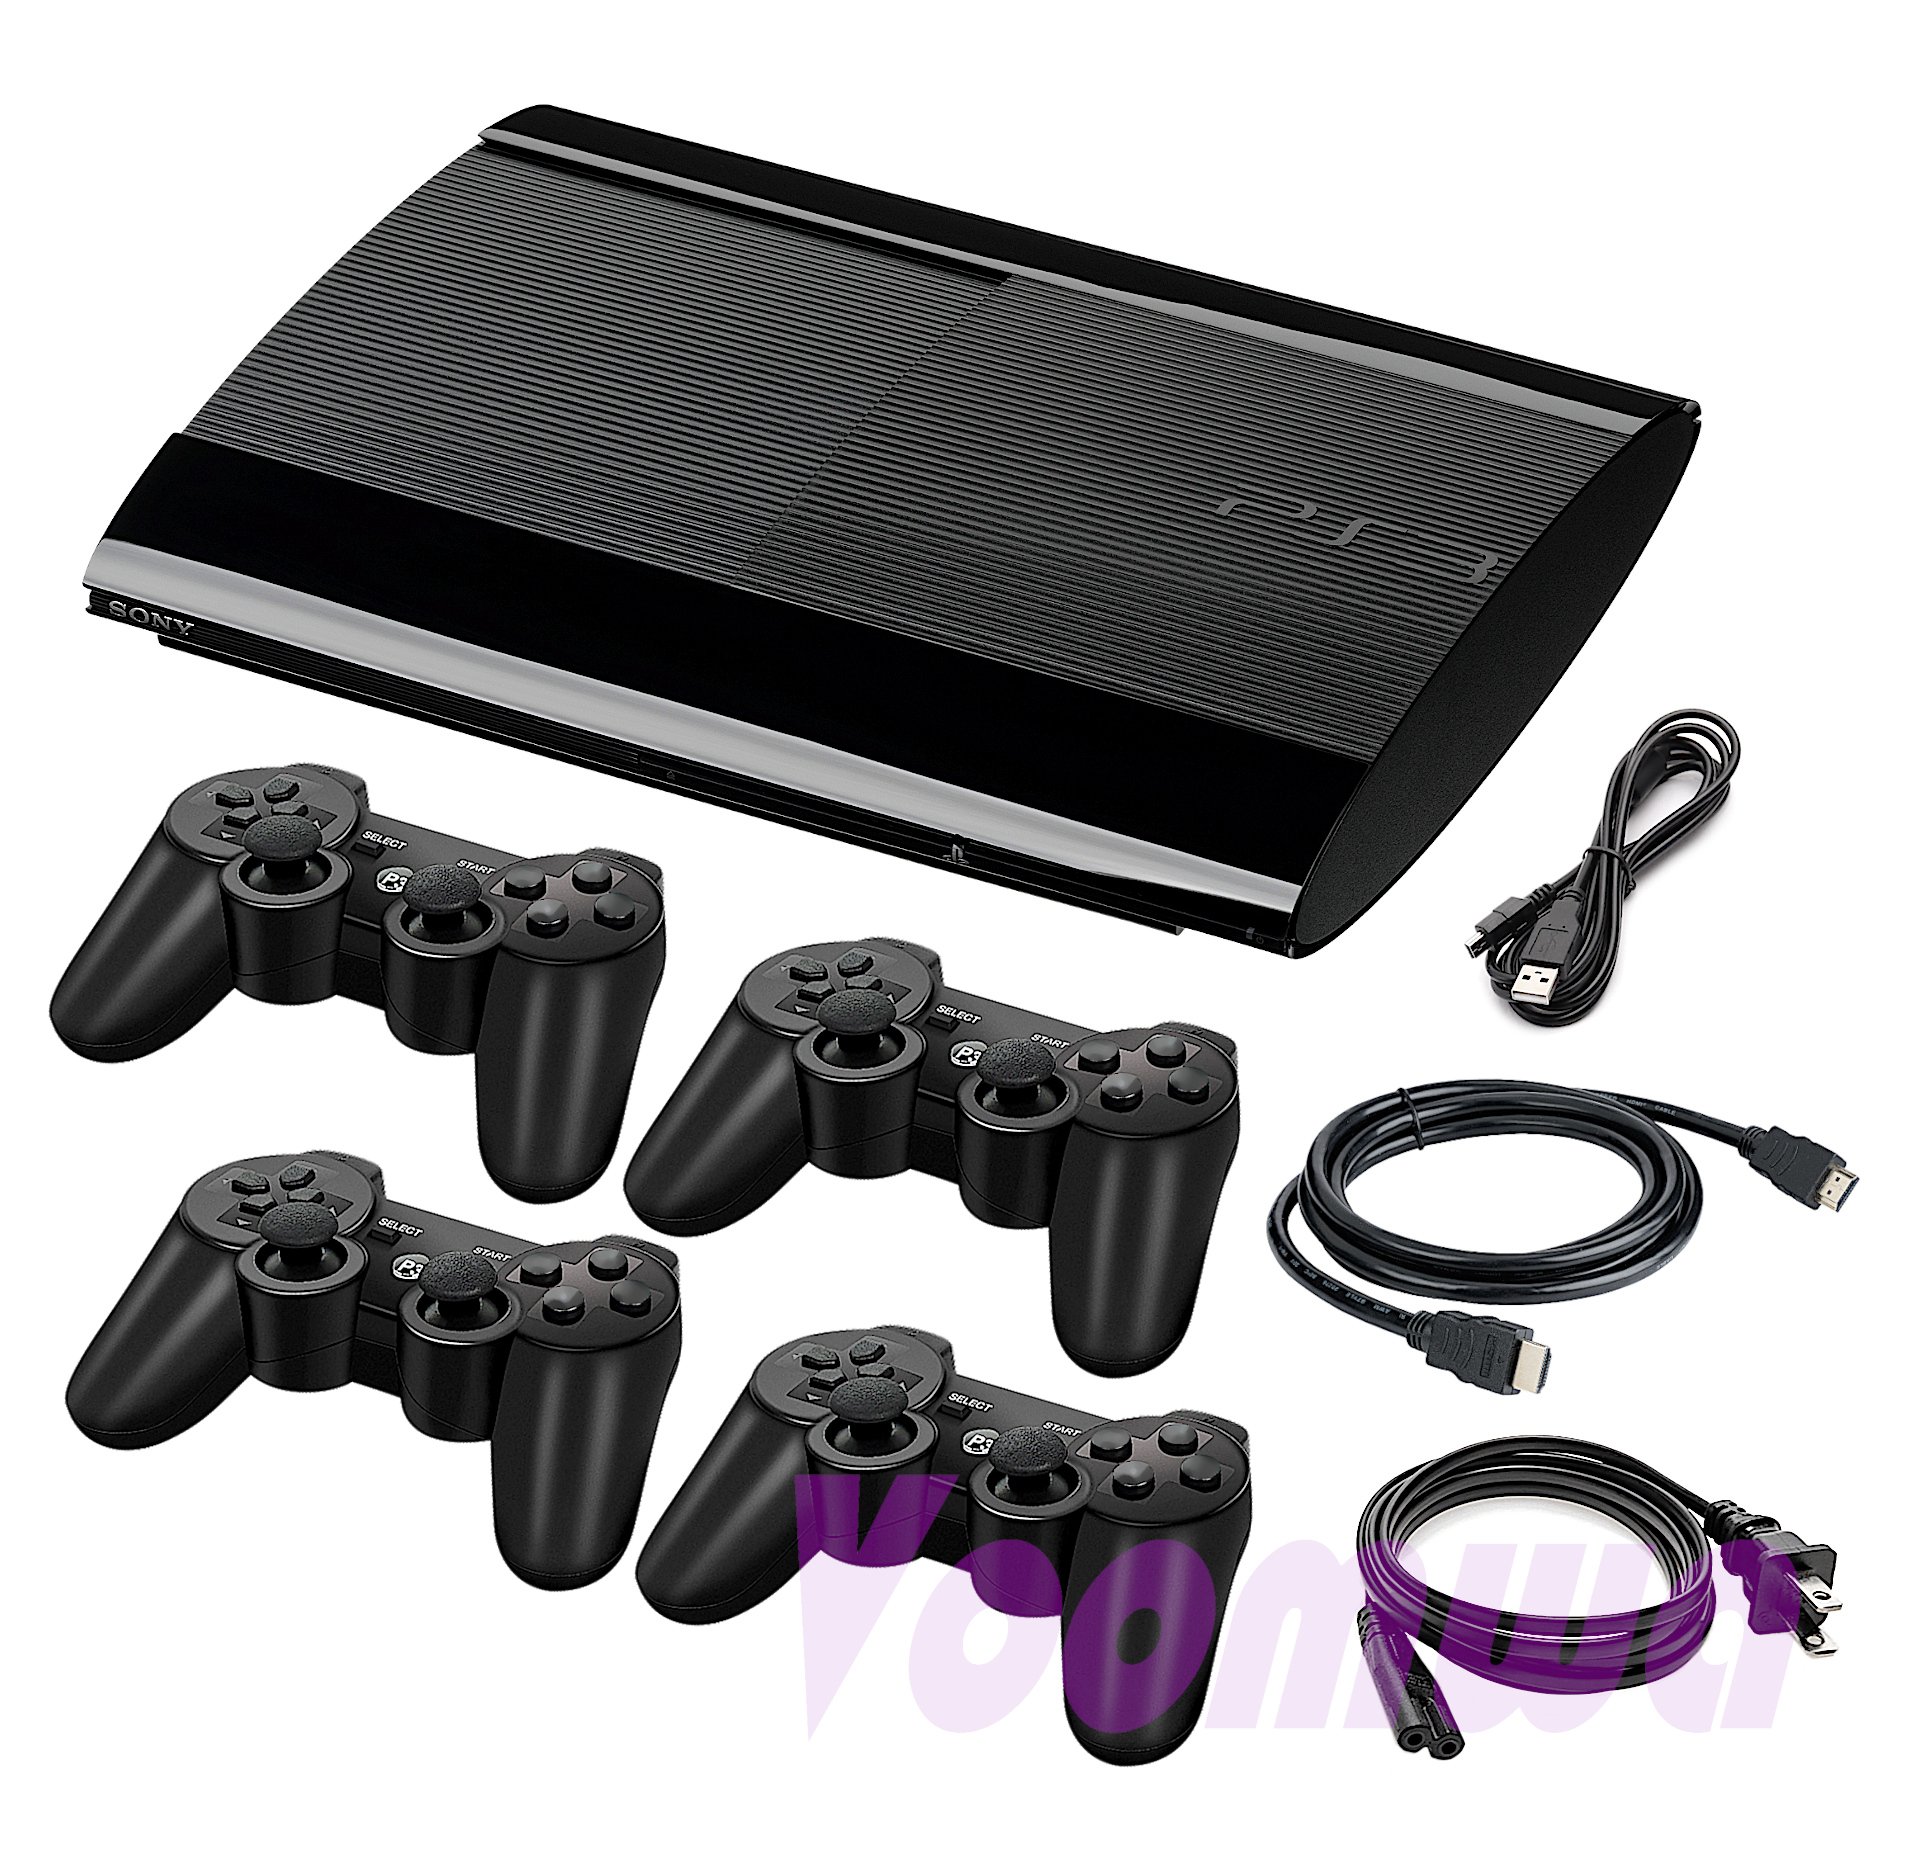 Guaranteed PlayStation 3 Super Slim Console + Your Choice 1-4 Wireless Controllers +12GB, 250GB or 500GB Storage + US Seller